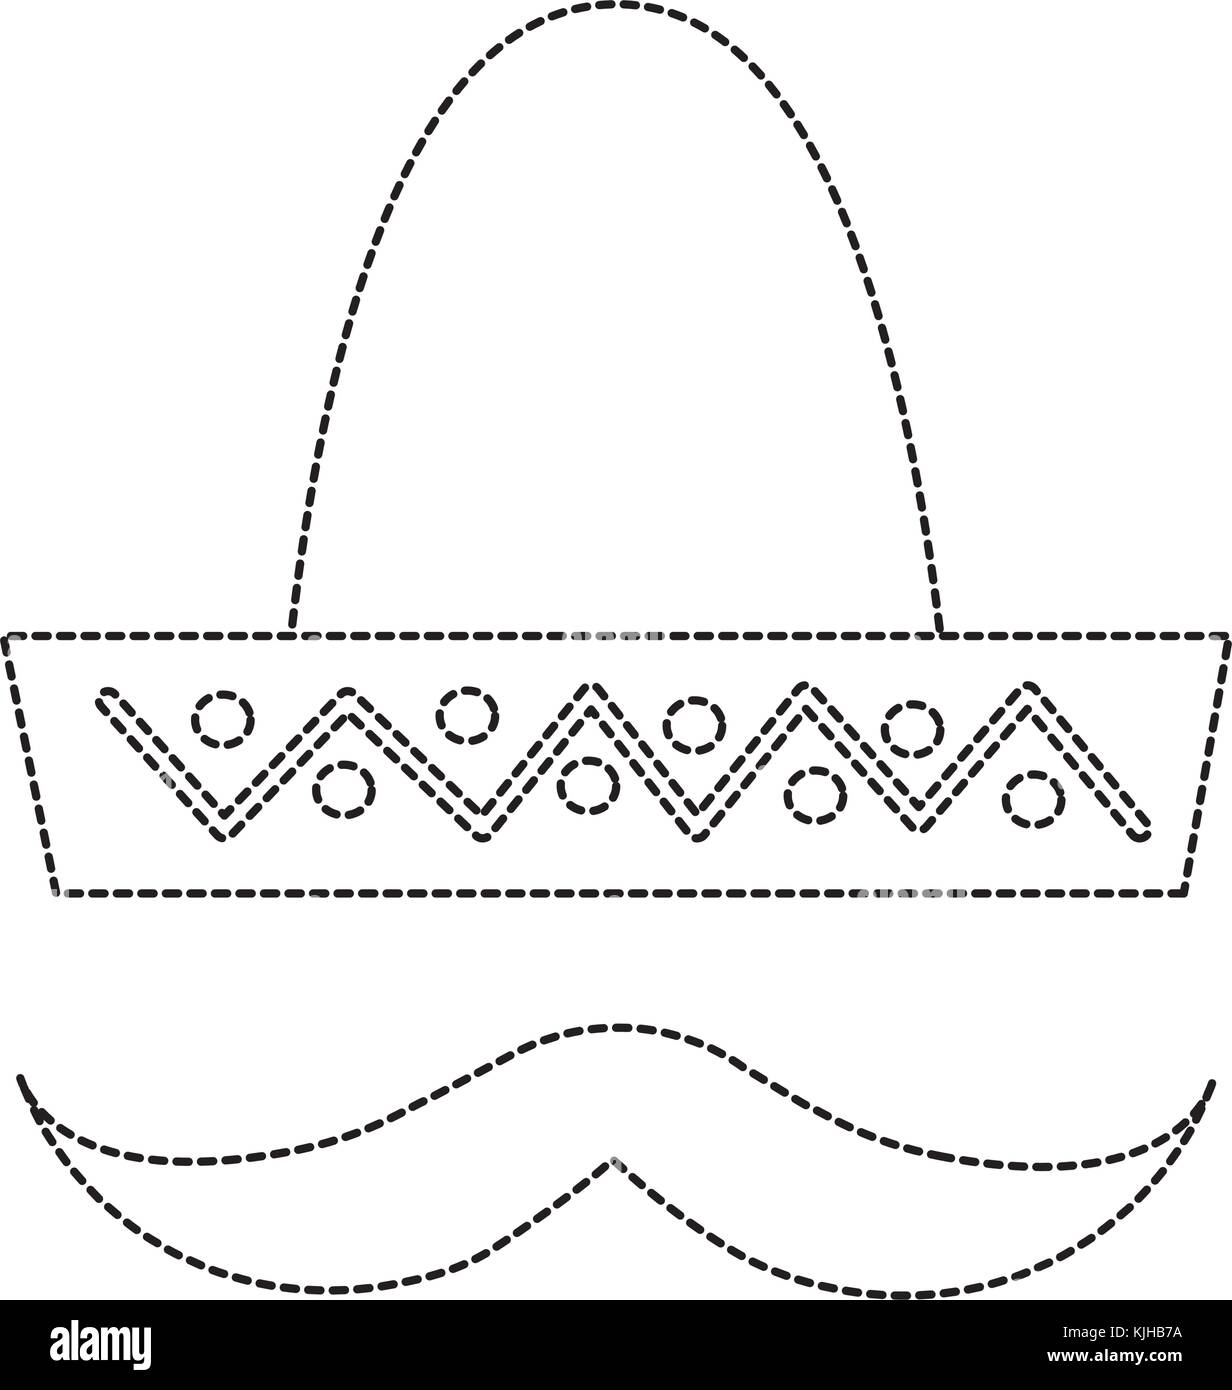 paper-sombrero-template-printable-word-searches